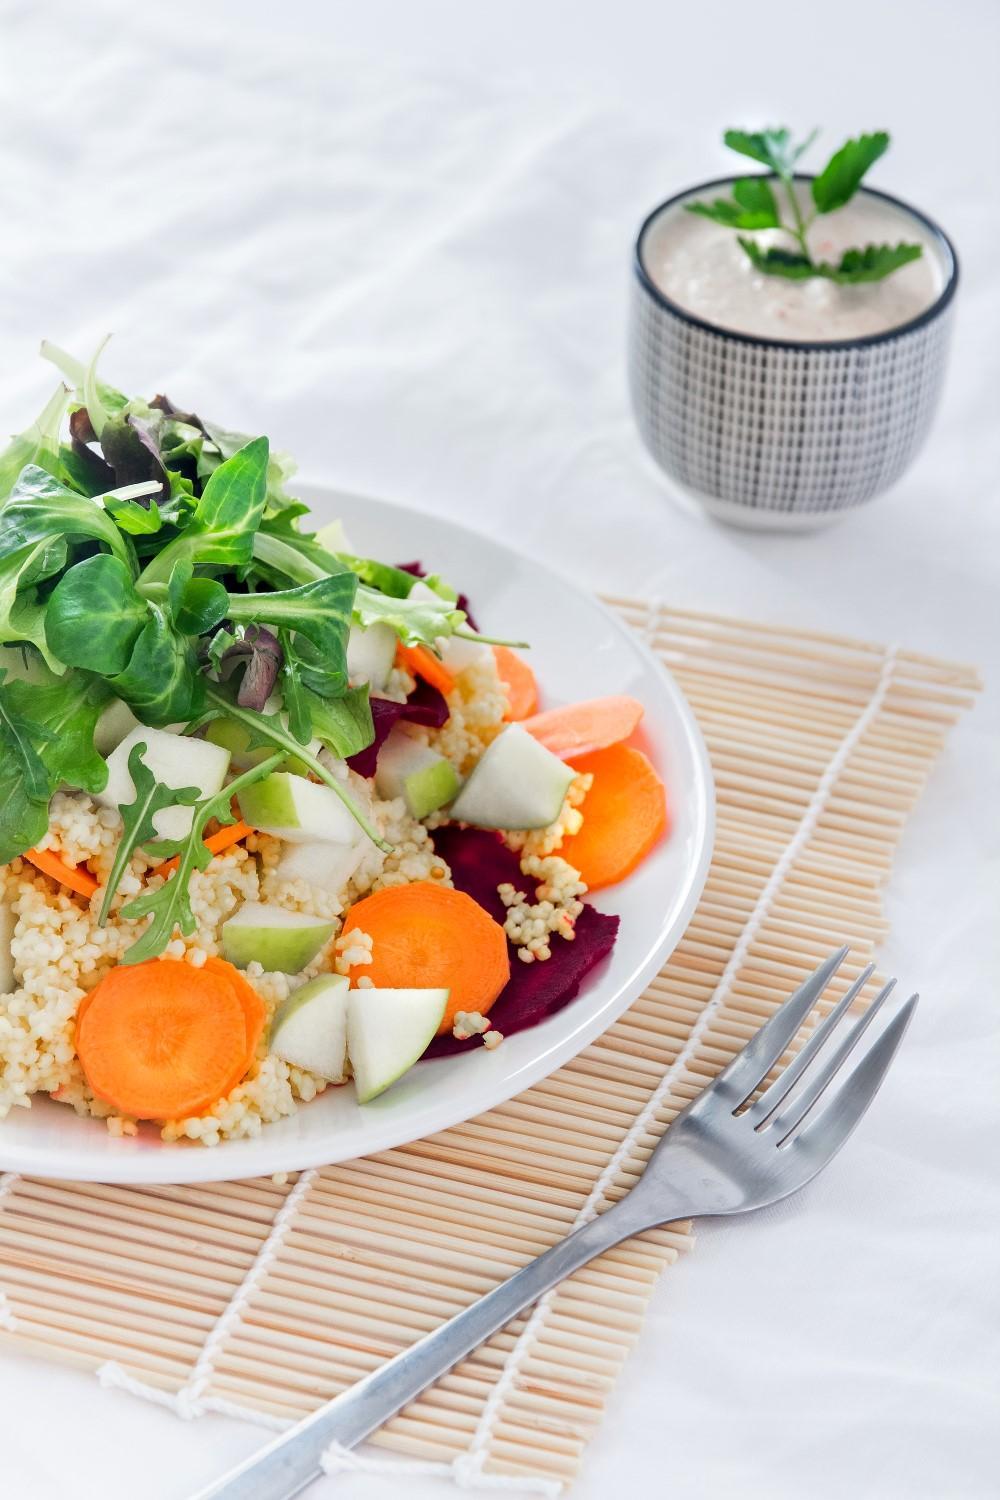 Use Your Noodles - Millet and Carrot Salad with Creamy Almond Dressing